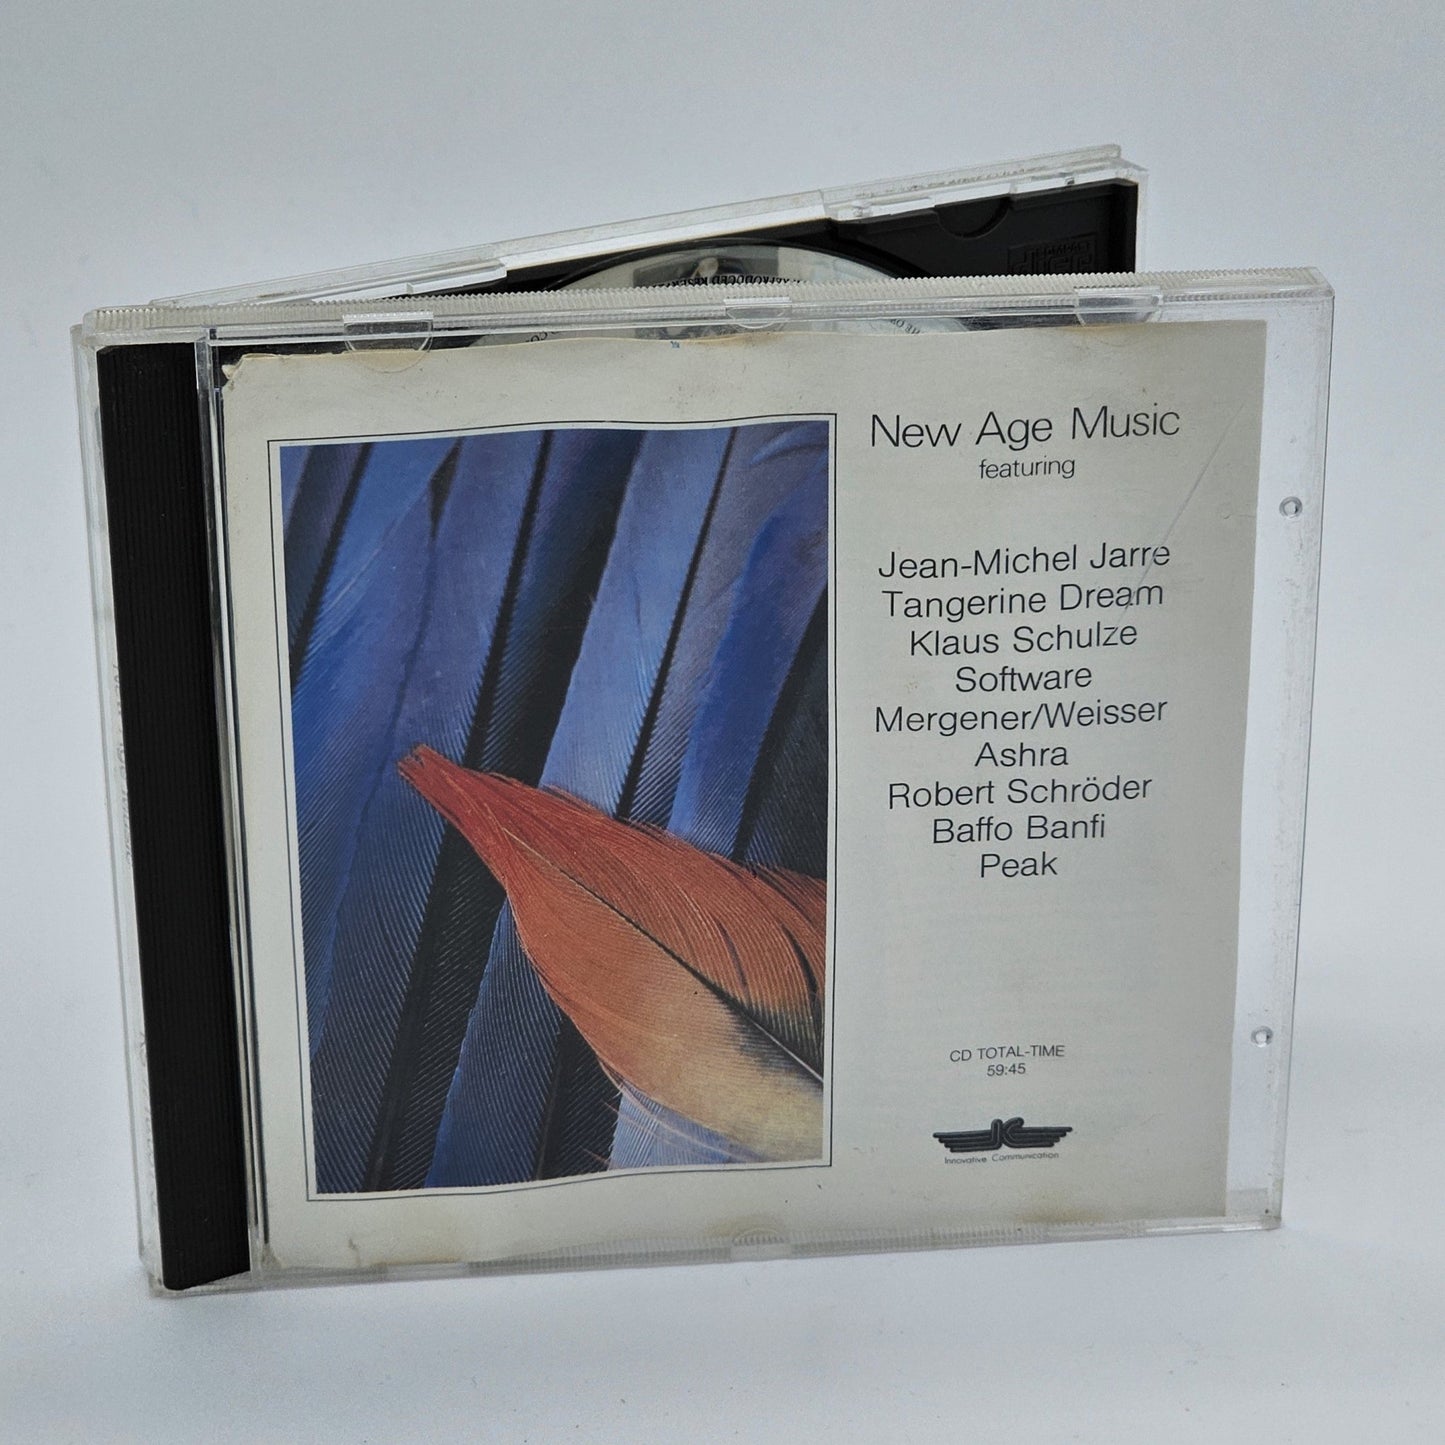 Innovative Communications - New Age Music | CD - Compact Disc - Steady Bunny Shop